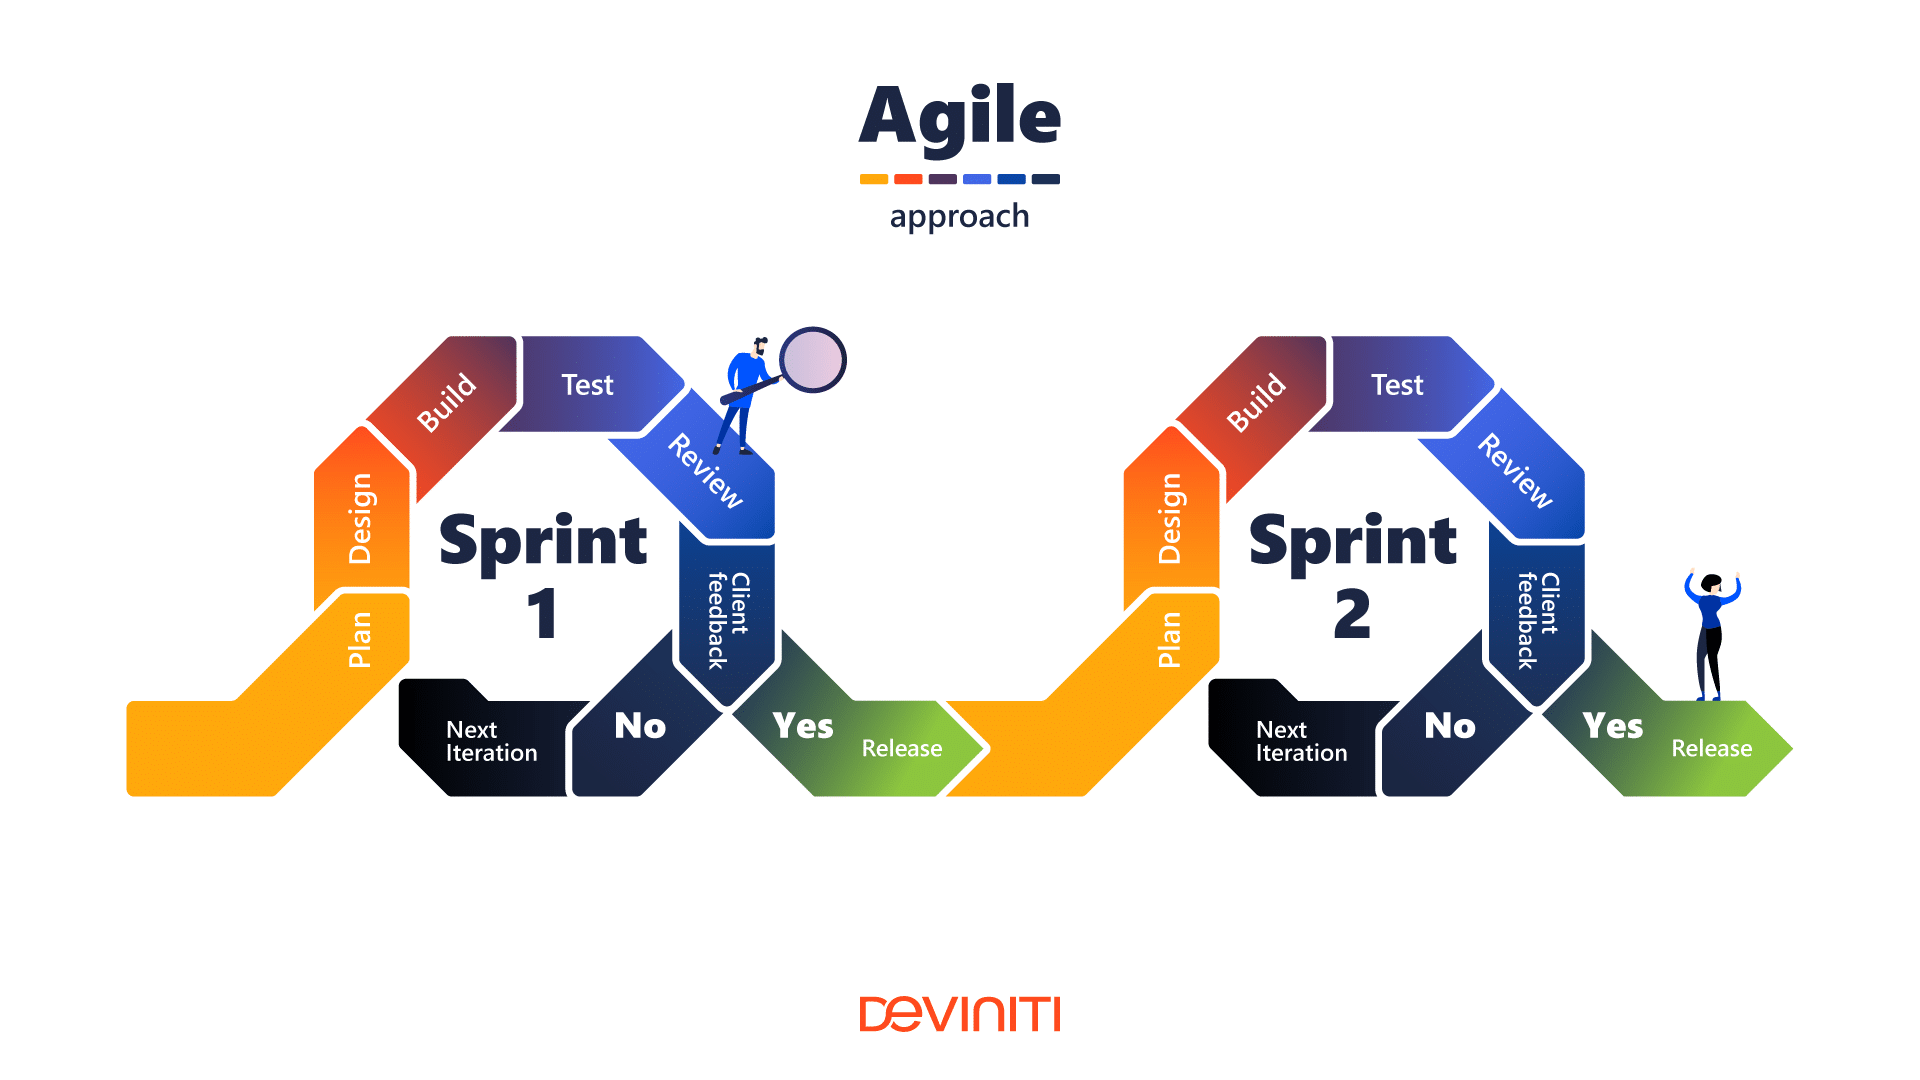 Sprint 1: plan, design, build, test, review, client feedback, no: next iteration/yes: release. Sprint 2: plan, design, build, test, review, client feedback, no: next iteration/yes